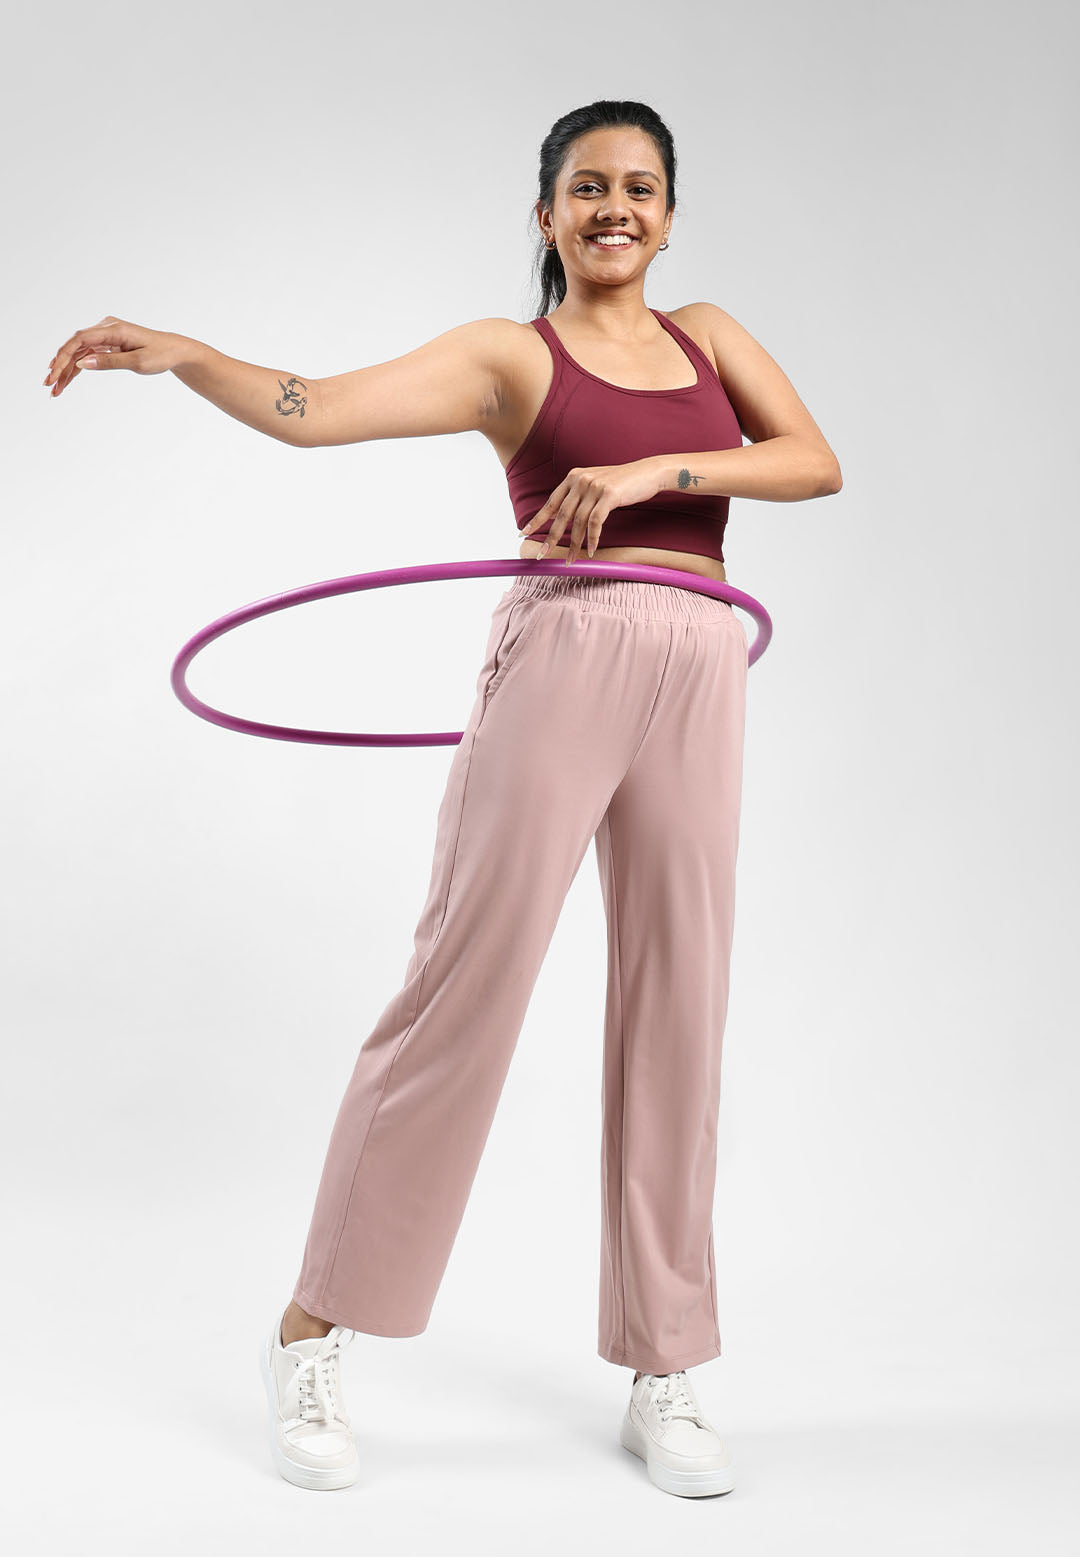 Buy Women's Dry fit Track Pants Lower for Jogging Yoga Gym Online